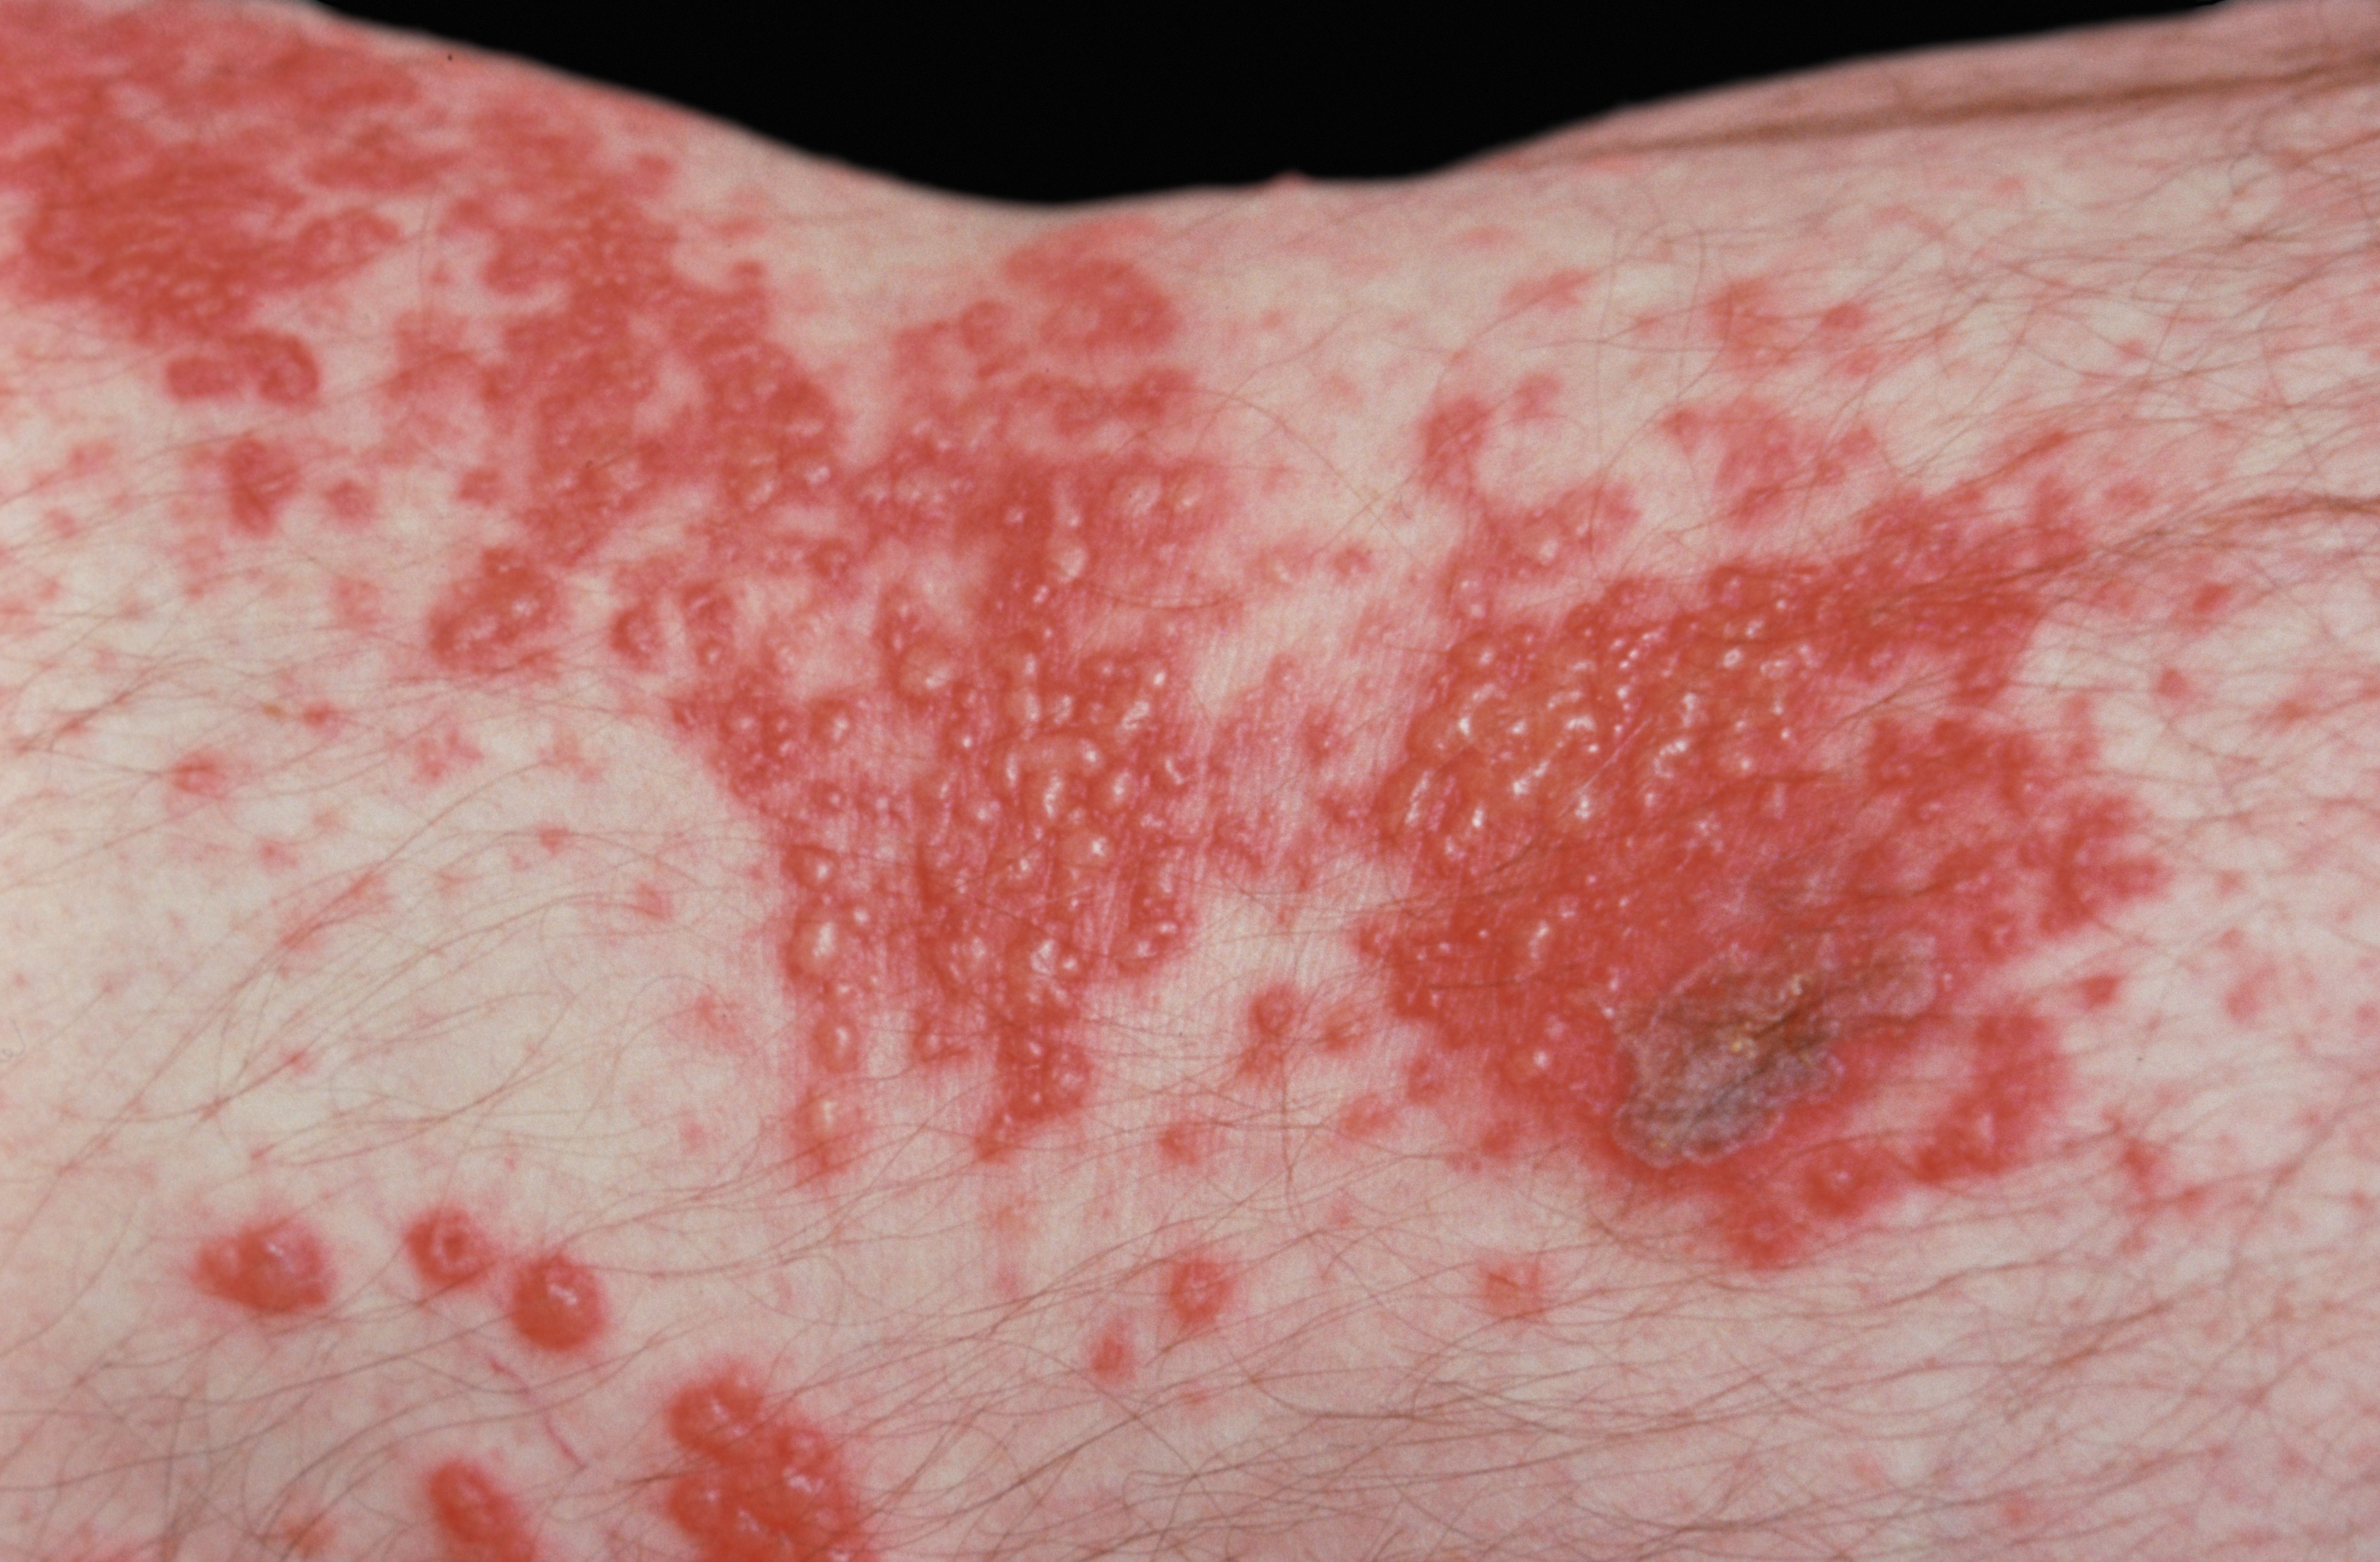 Herpes Zoster Or Shingles On A Human Arm  Vis416291 5a2da57f9e9427003768684b 